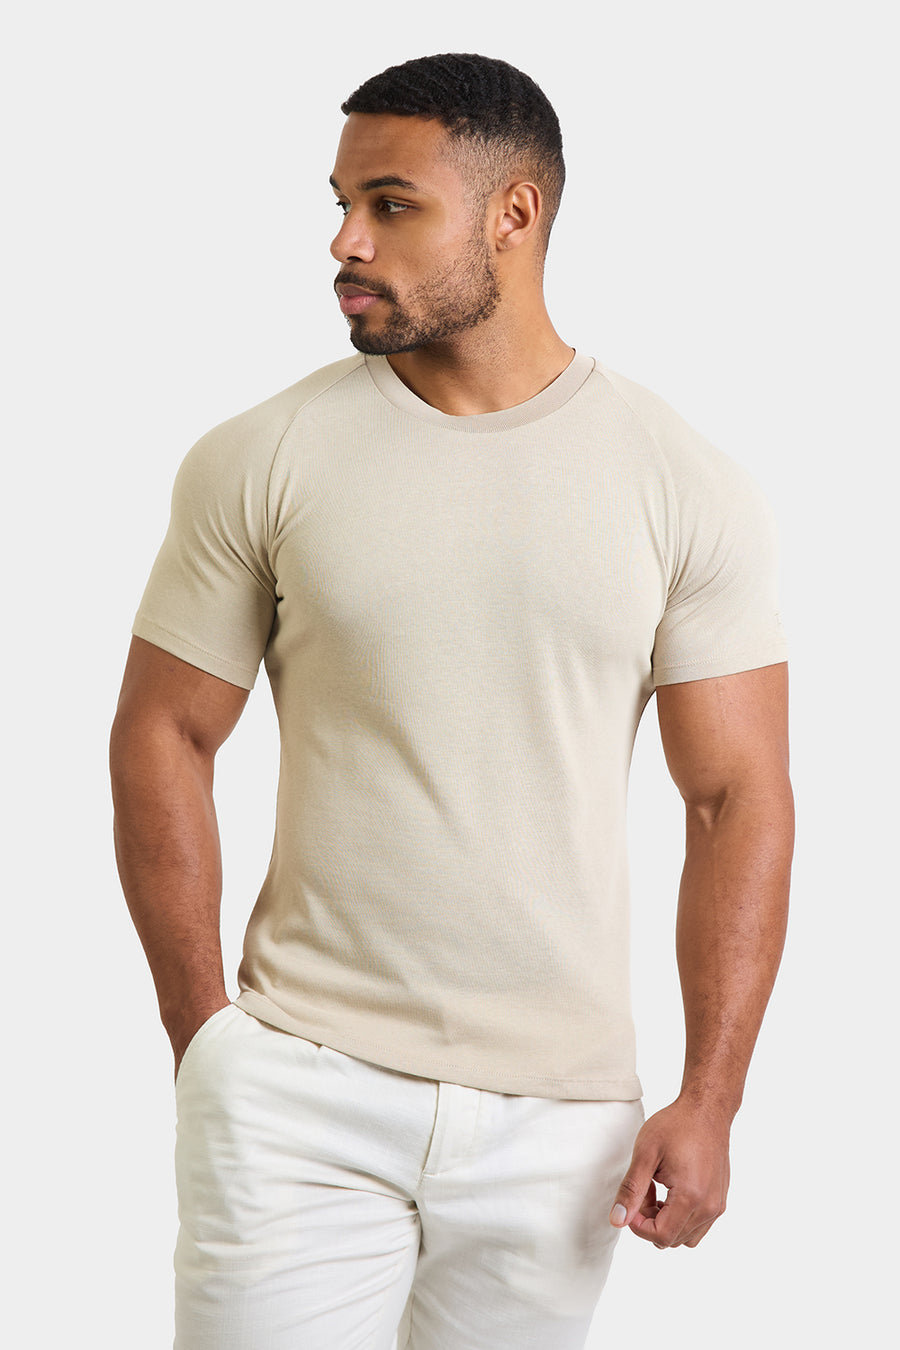 Knit Look T-Shirt in Stone - TAILORED ATHLETE - USA